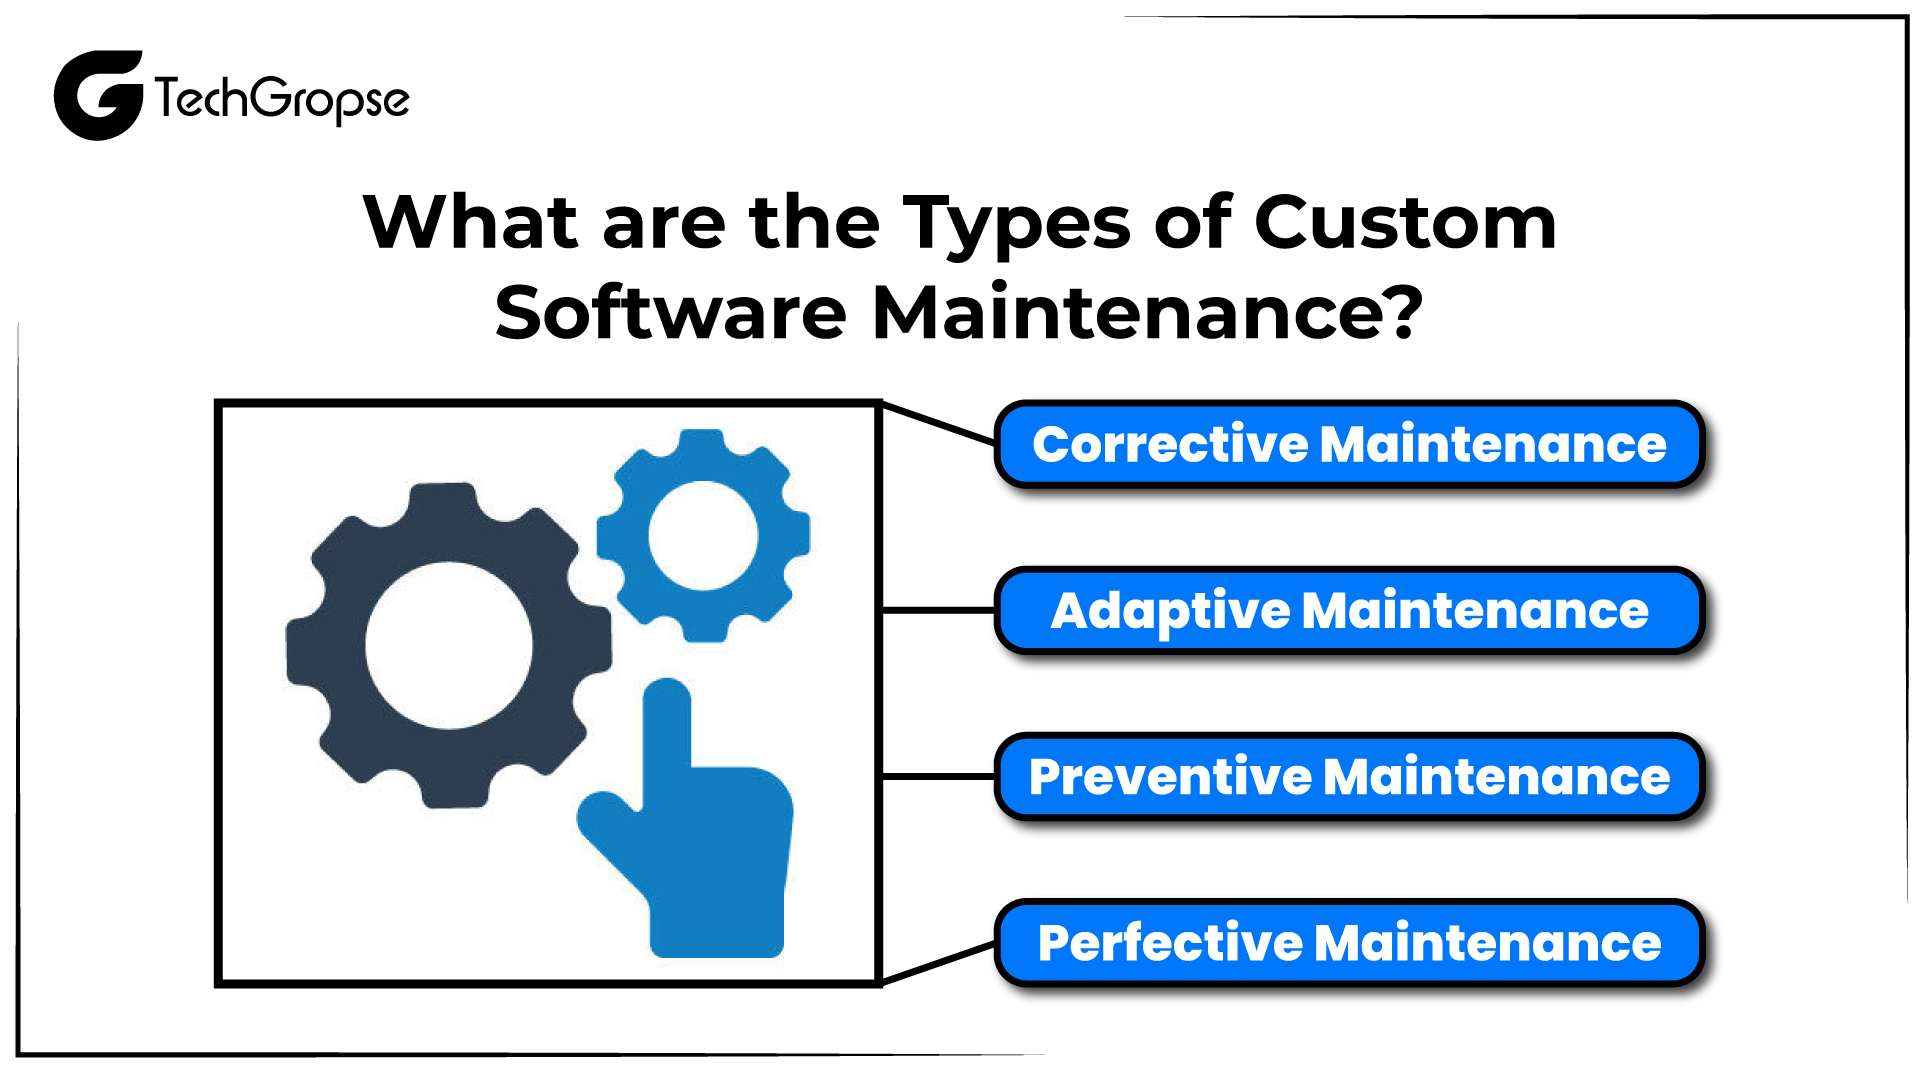 What are the Types of Custom Software Maintenance?